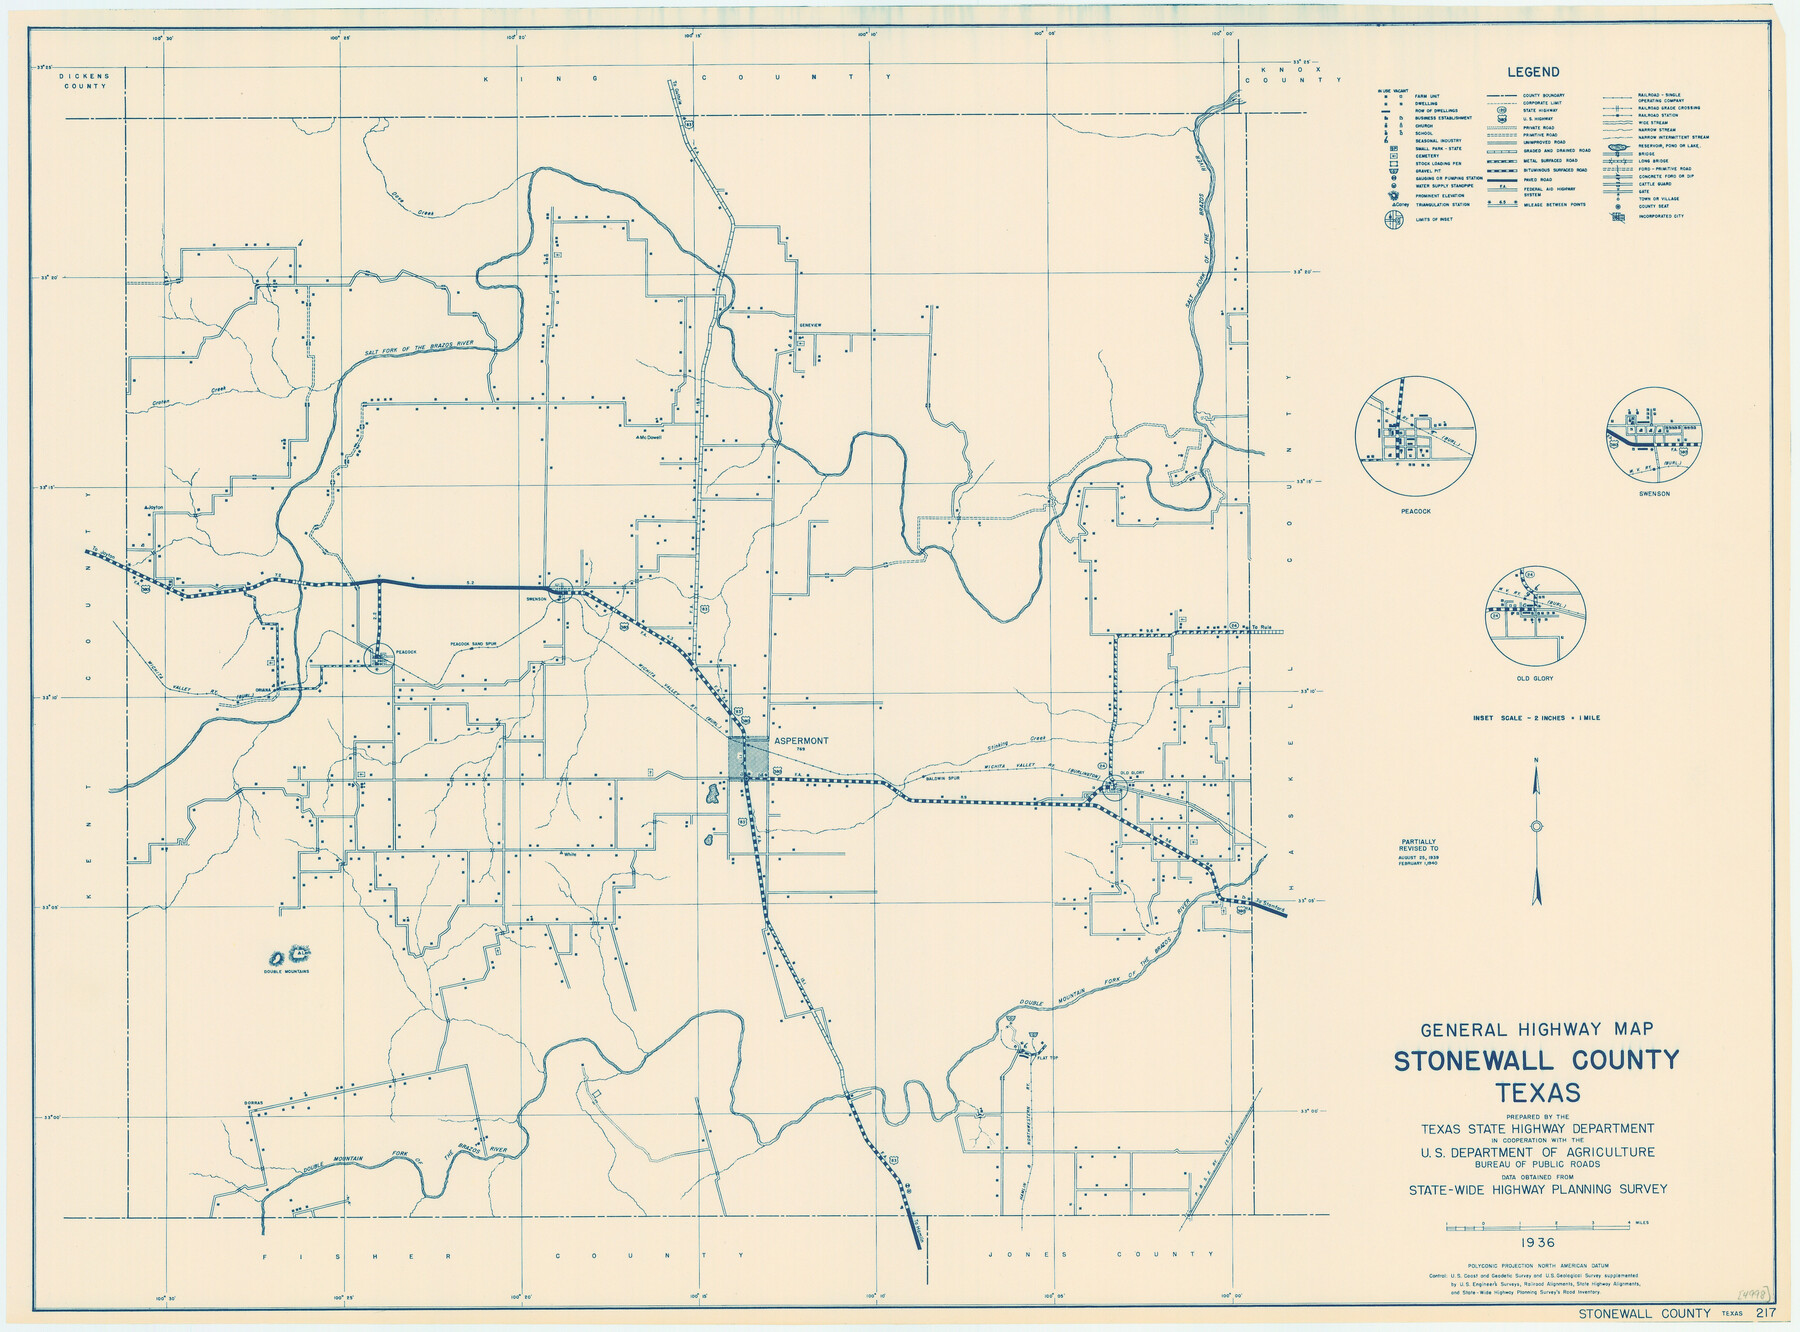 79249, General Highway Map, Stonewall County, Texas, Texas State Library and Archives